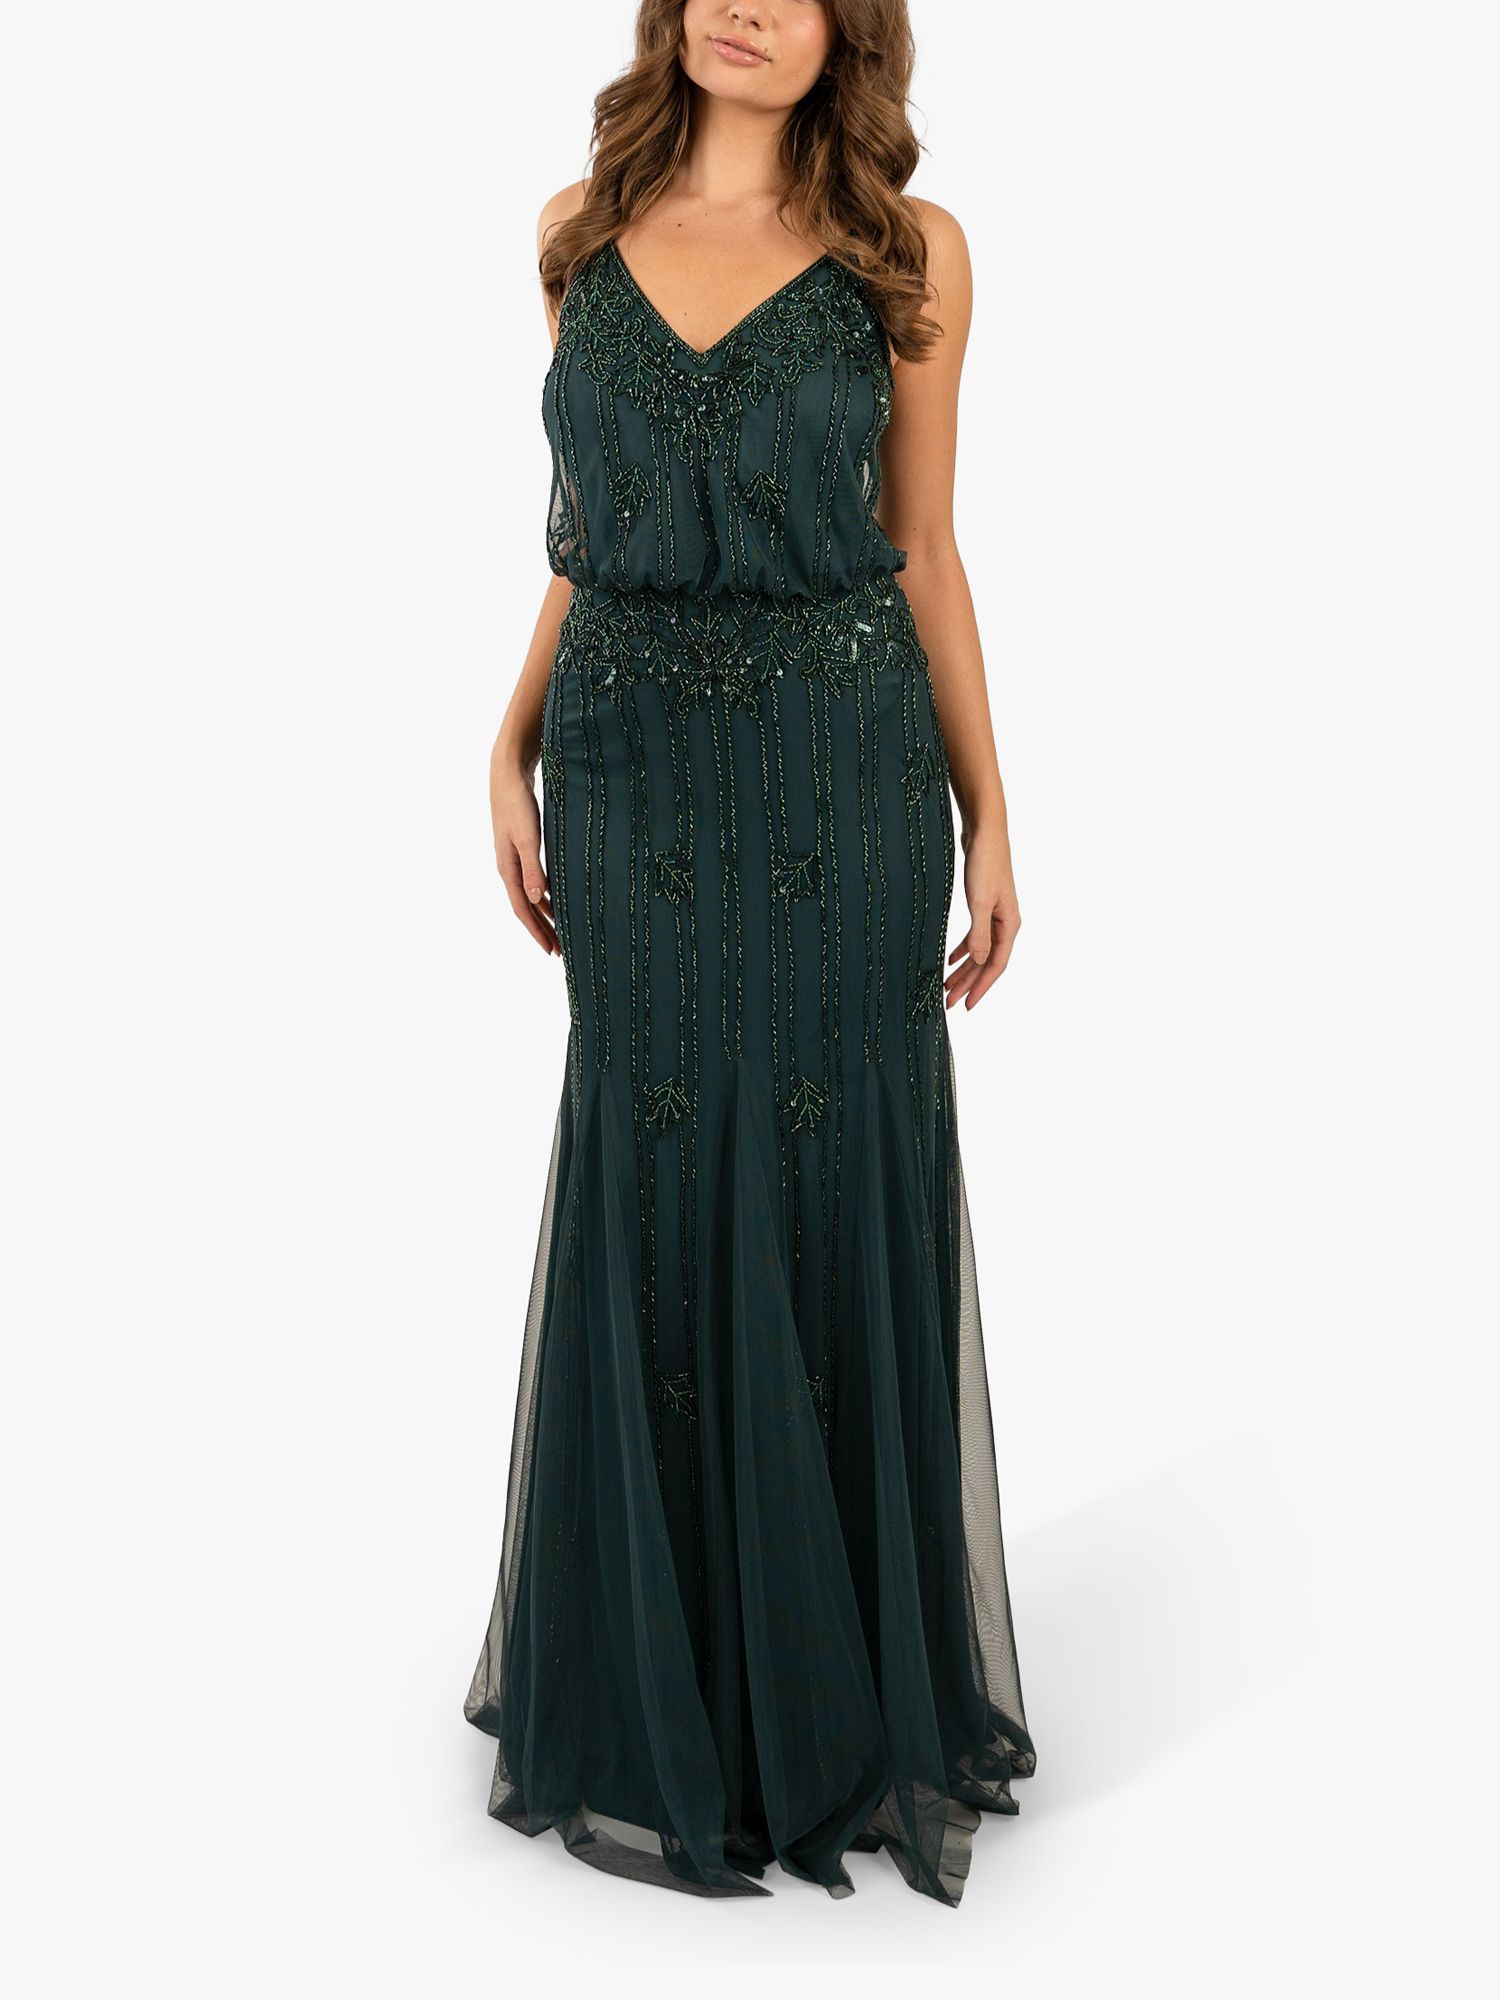 Buy Lace & Beads Keeva Embellished Maxi Dress, Emerald Green Online at johnlewis.com